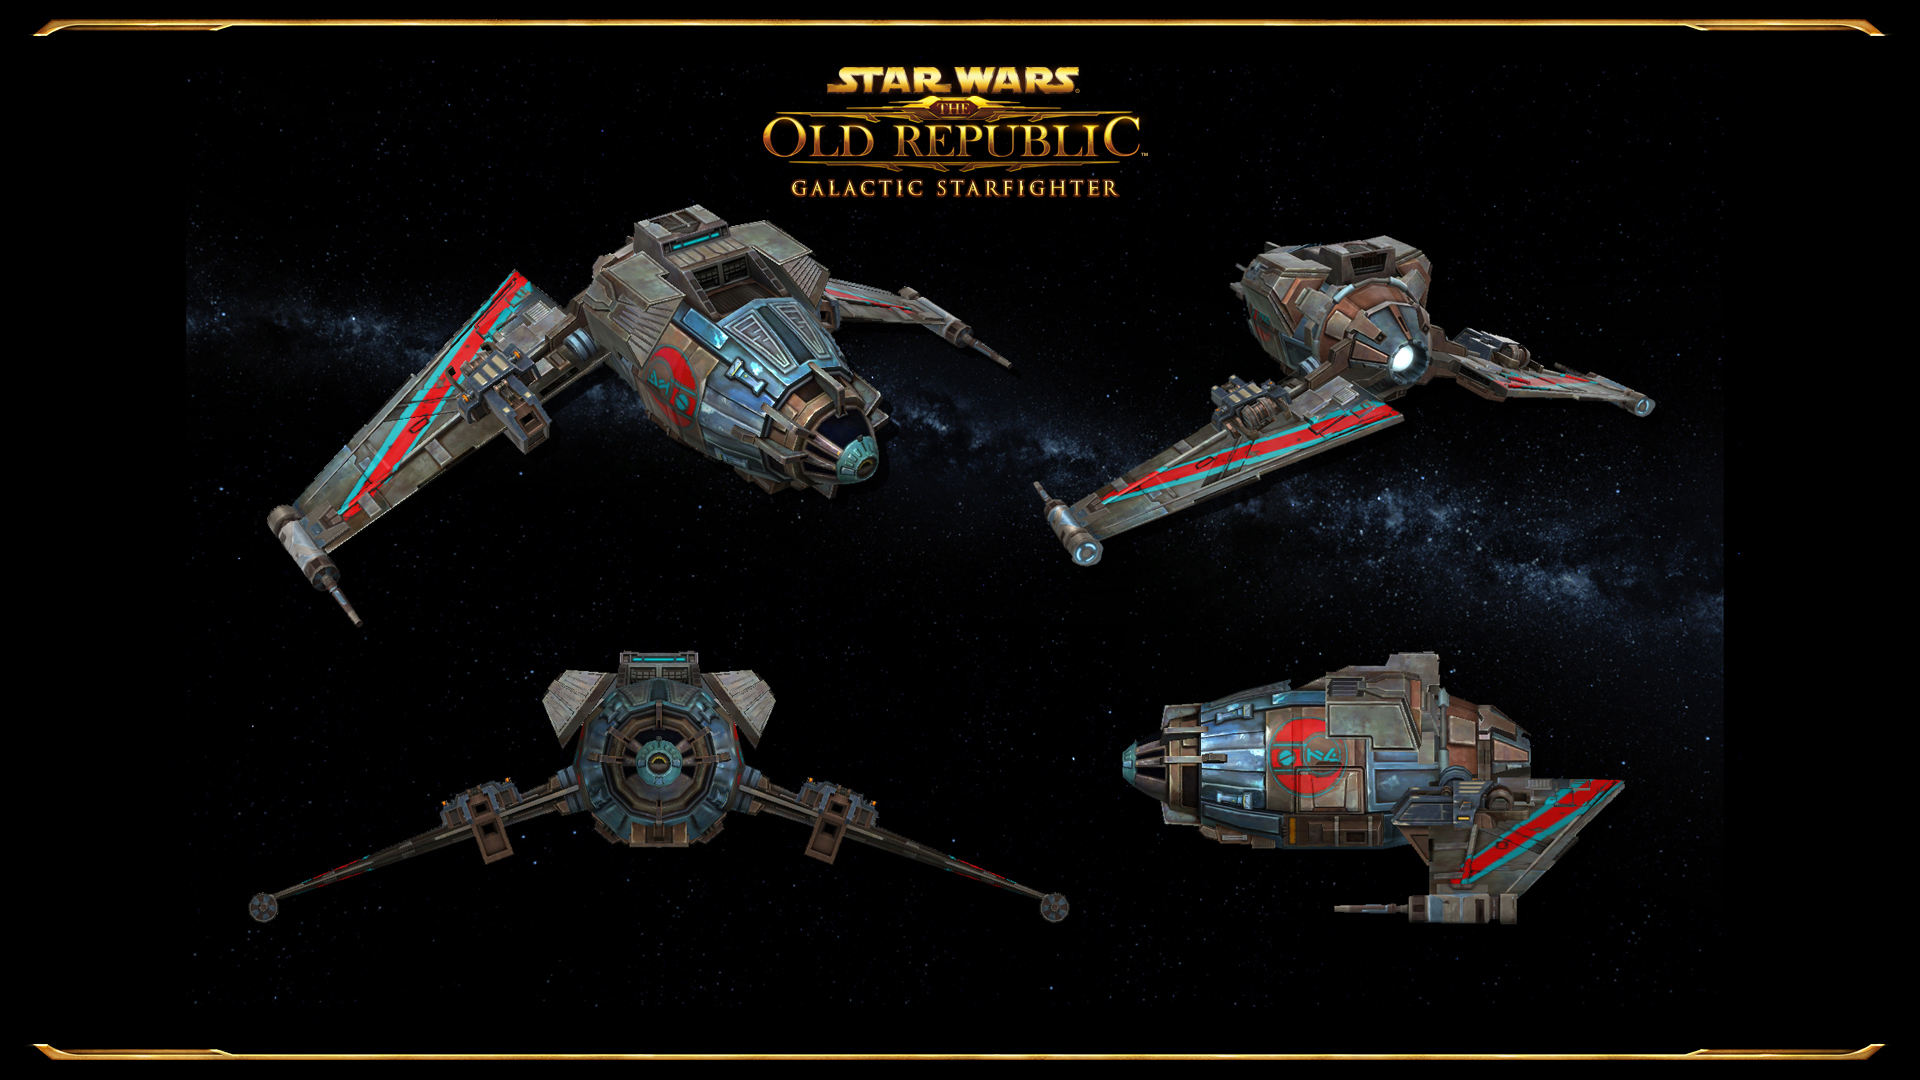 Star Wars: The Old Republic Starfighter (2013) promotional art